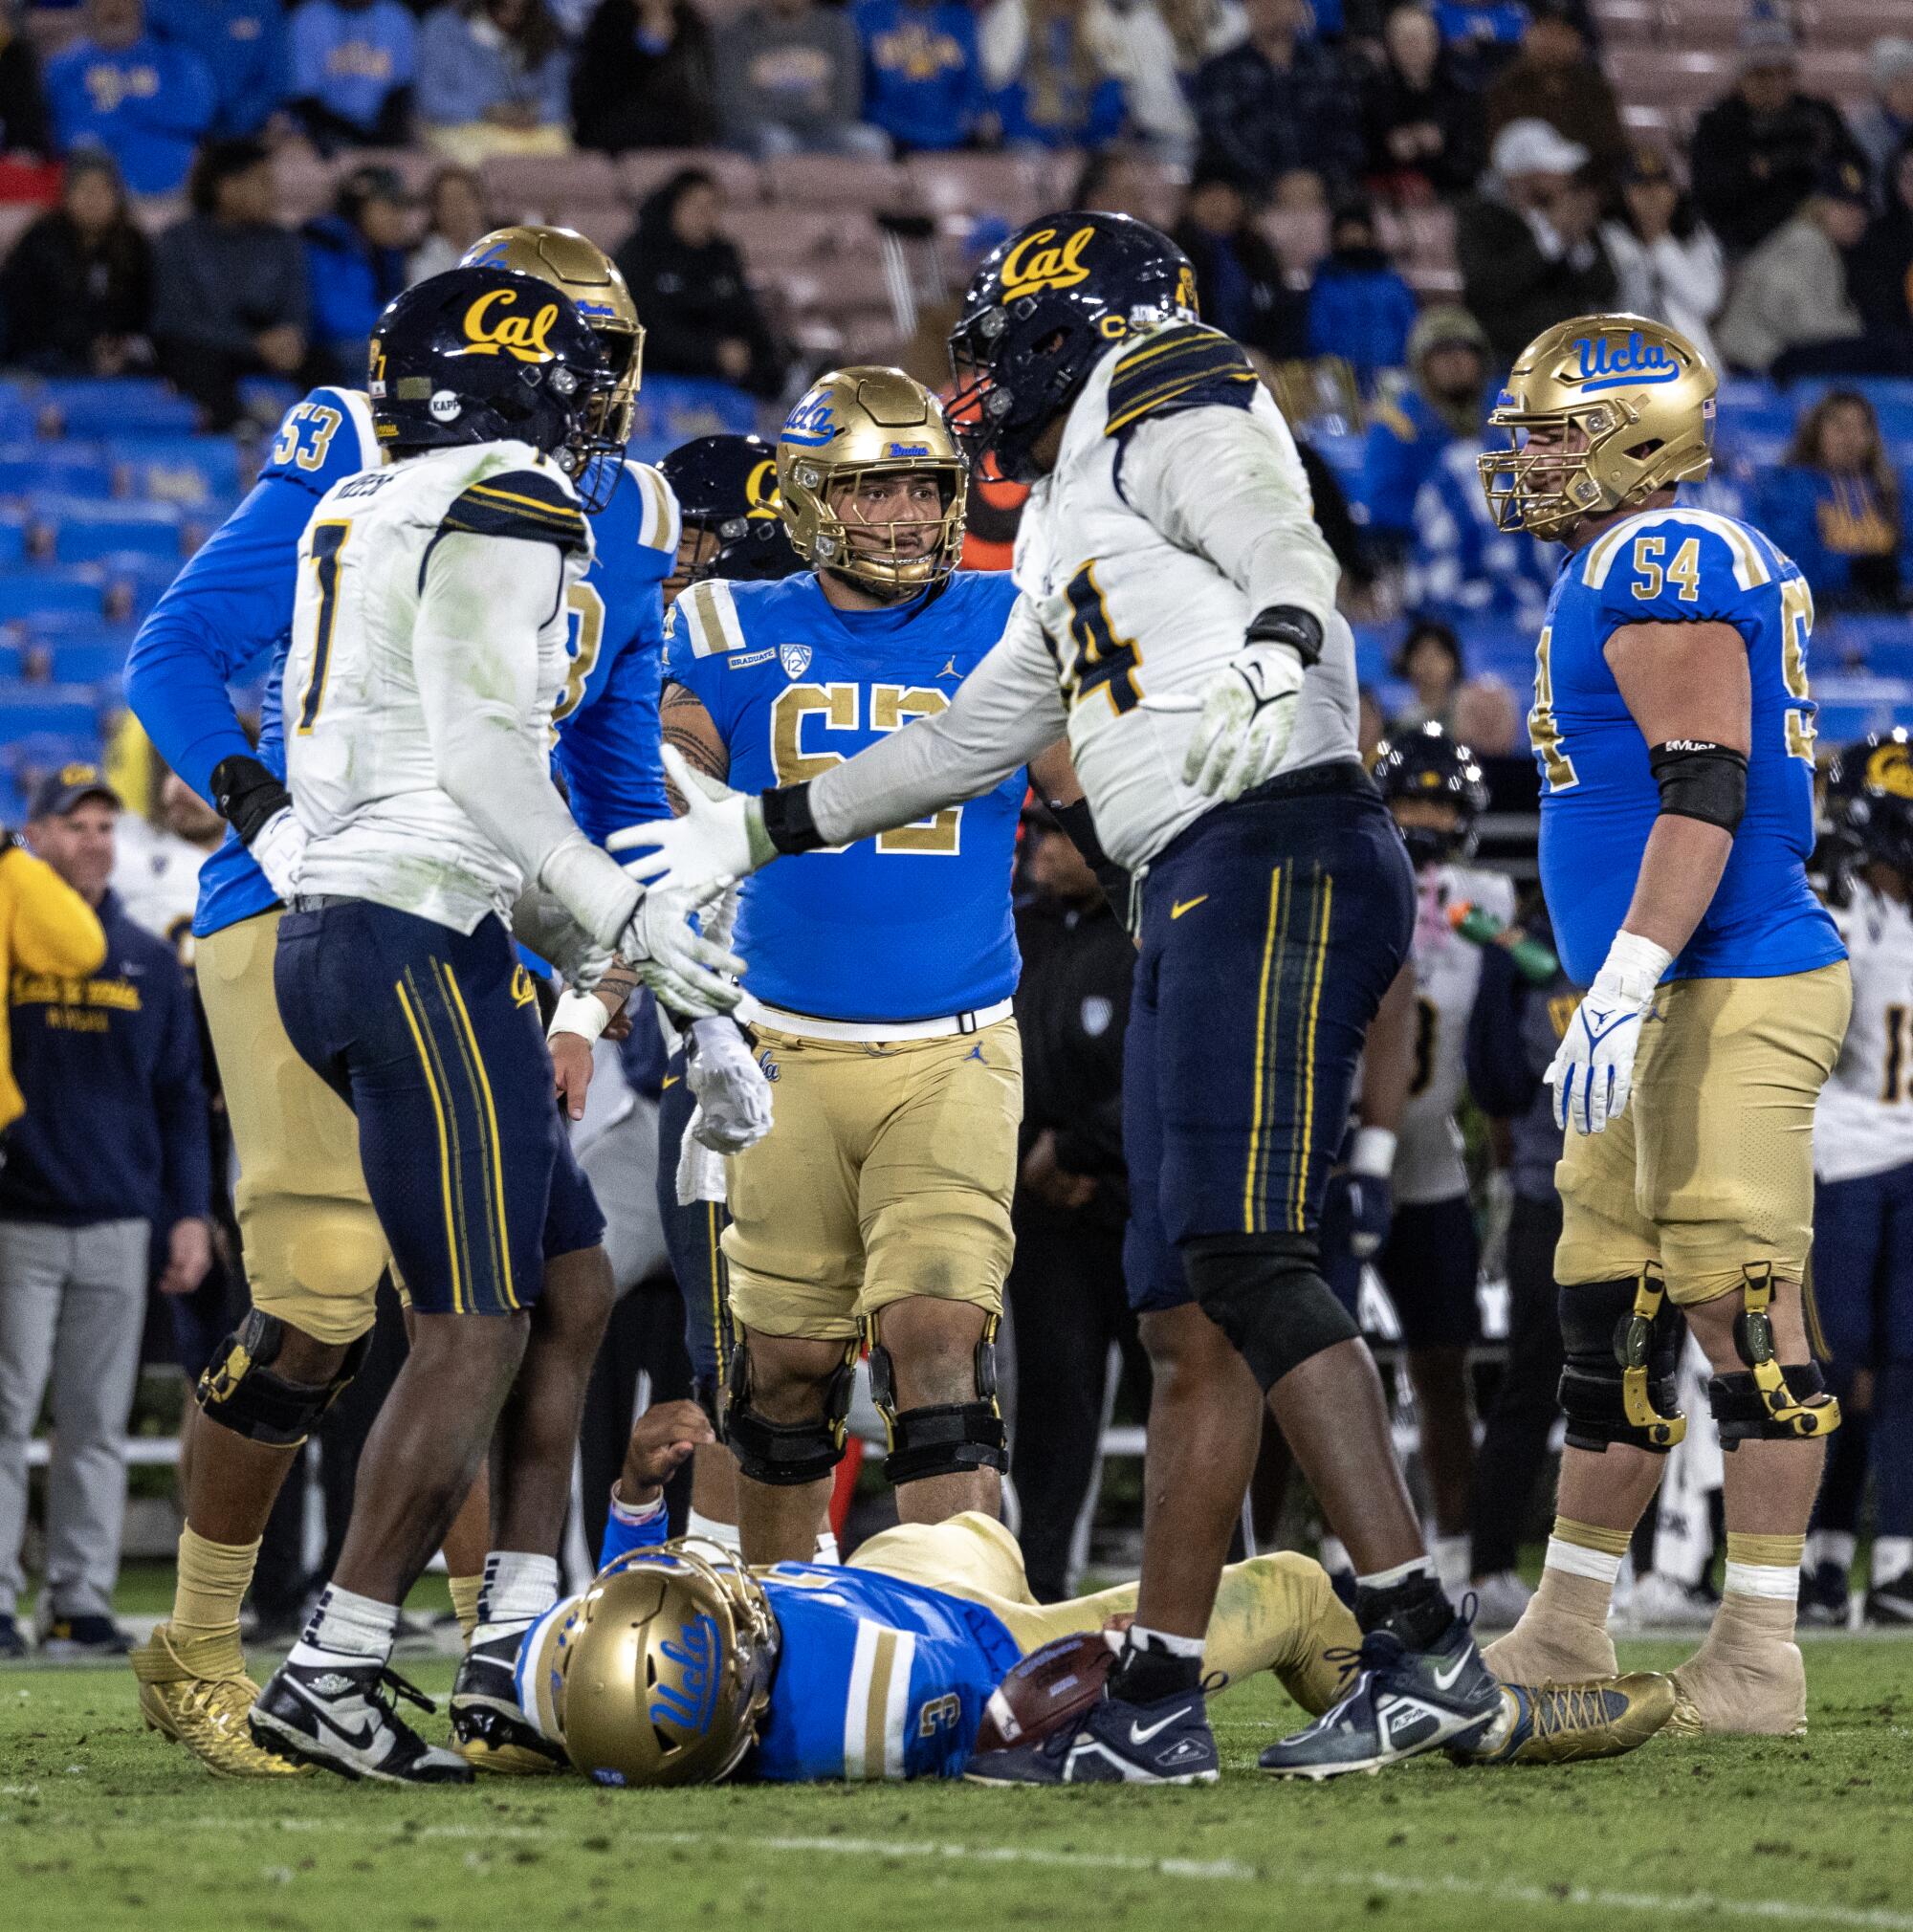 Cal's David Reese gets hand slap from Xavier Carlton after sacking UCLA quarterback Dante Moore, who is on the ground